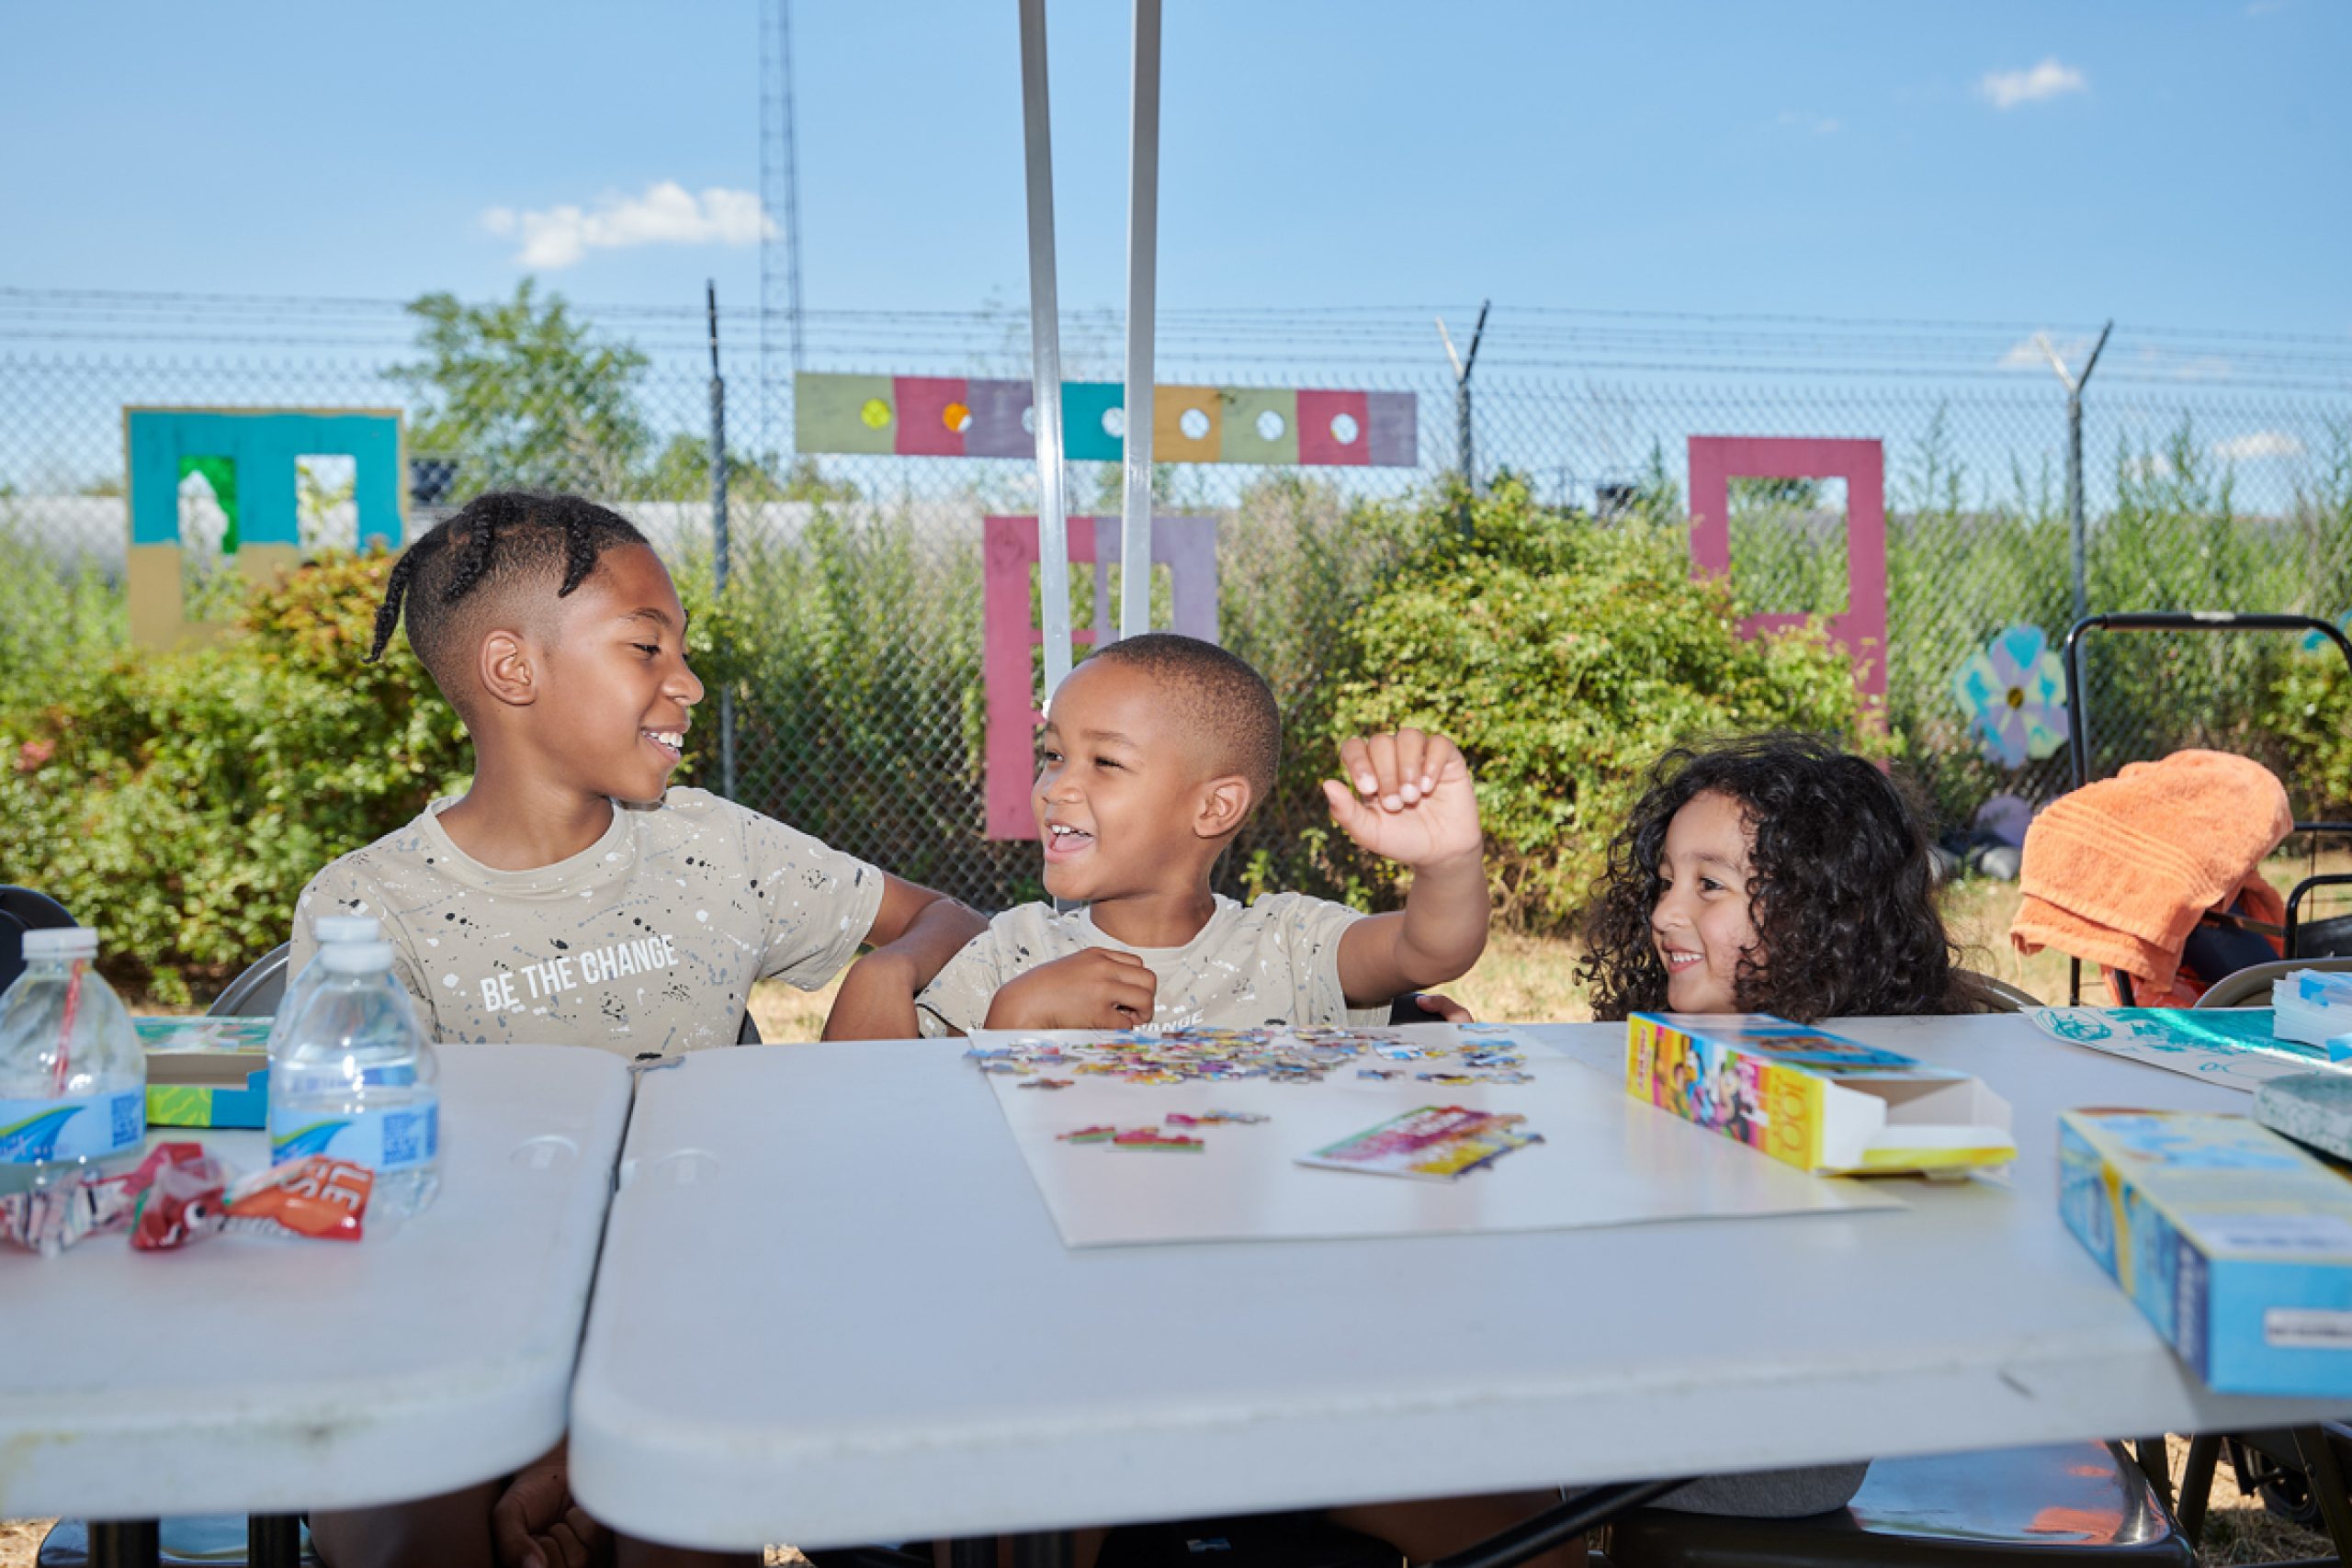 Are you a Philly parent? Here’s some community resources to make your job a little easier.